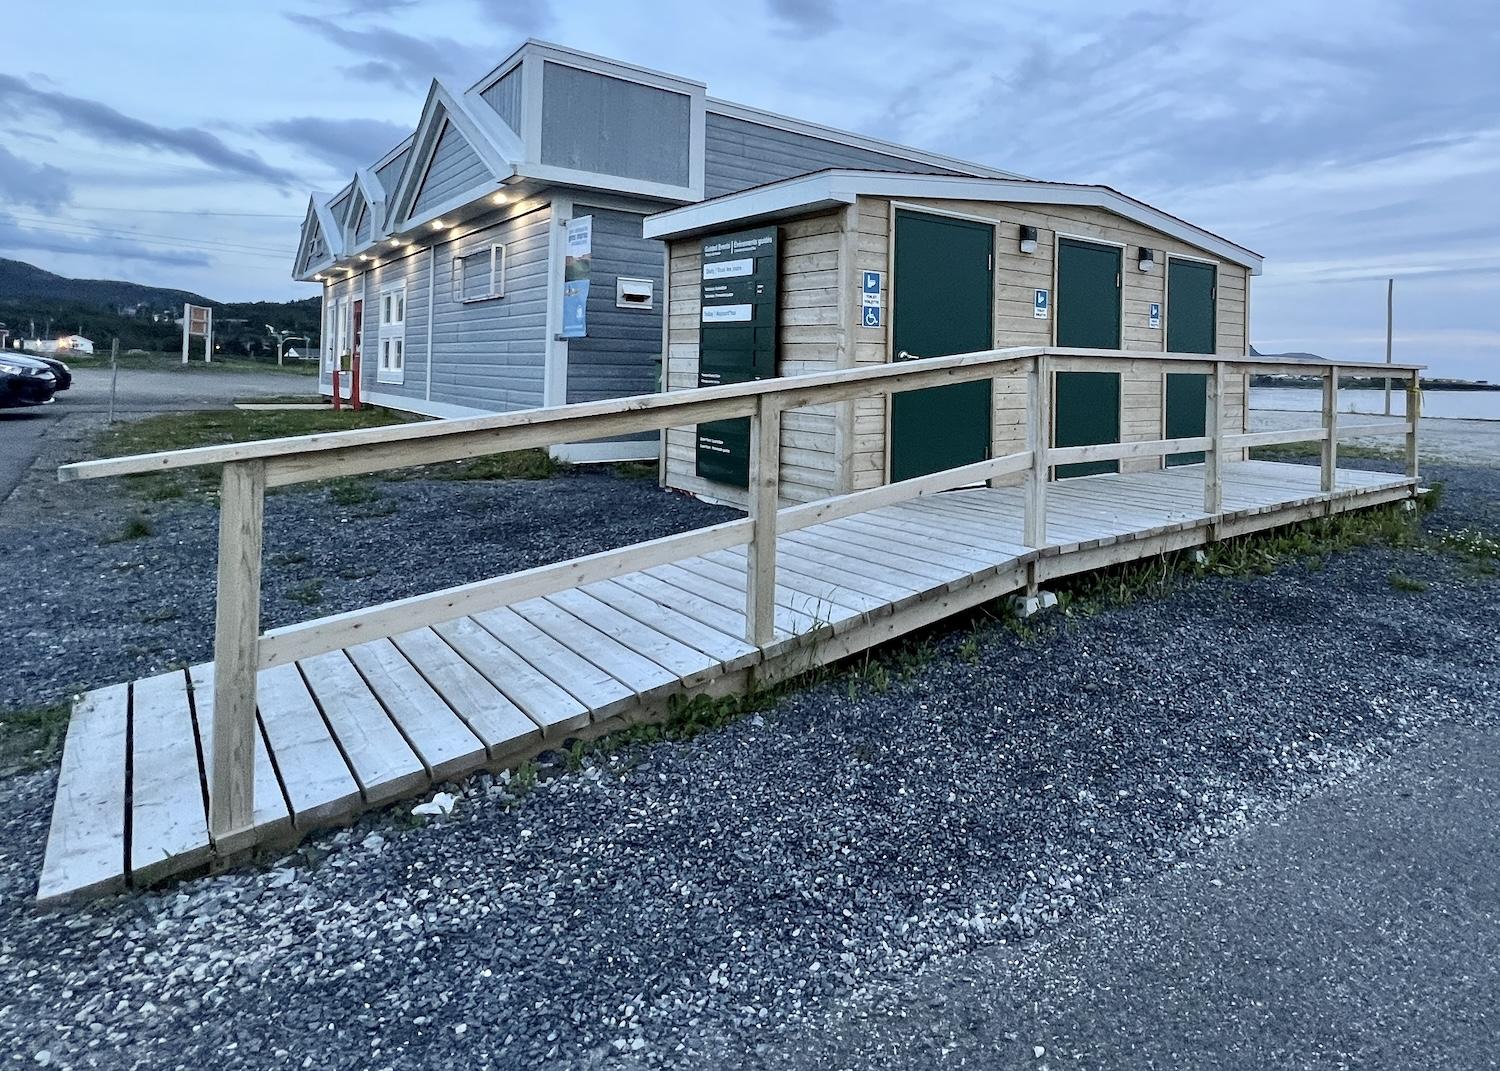 In Rocky Harbour, the Gros Morne National Park Visitor Centre has a wheelchair ramp.